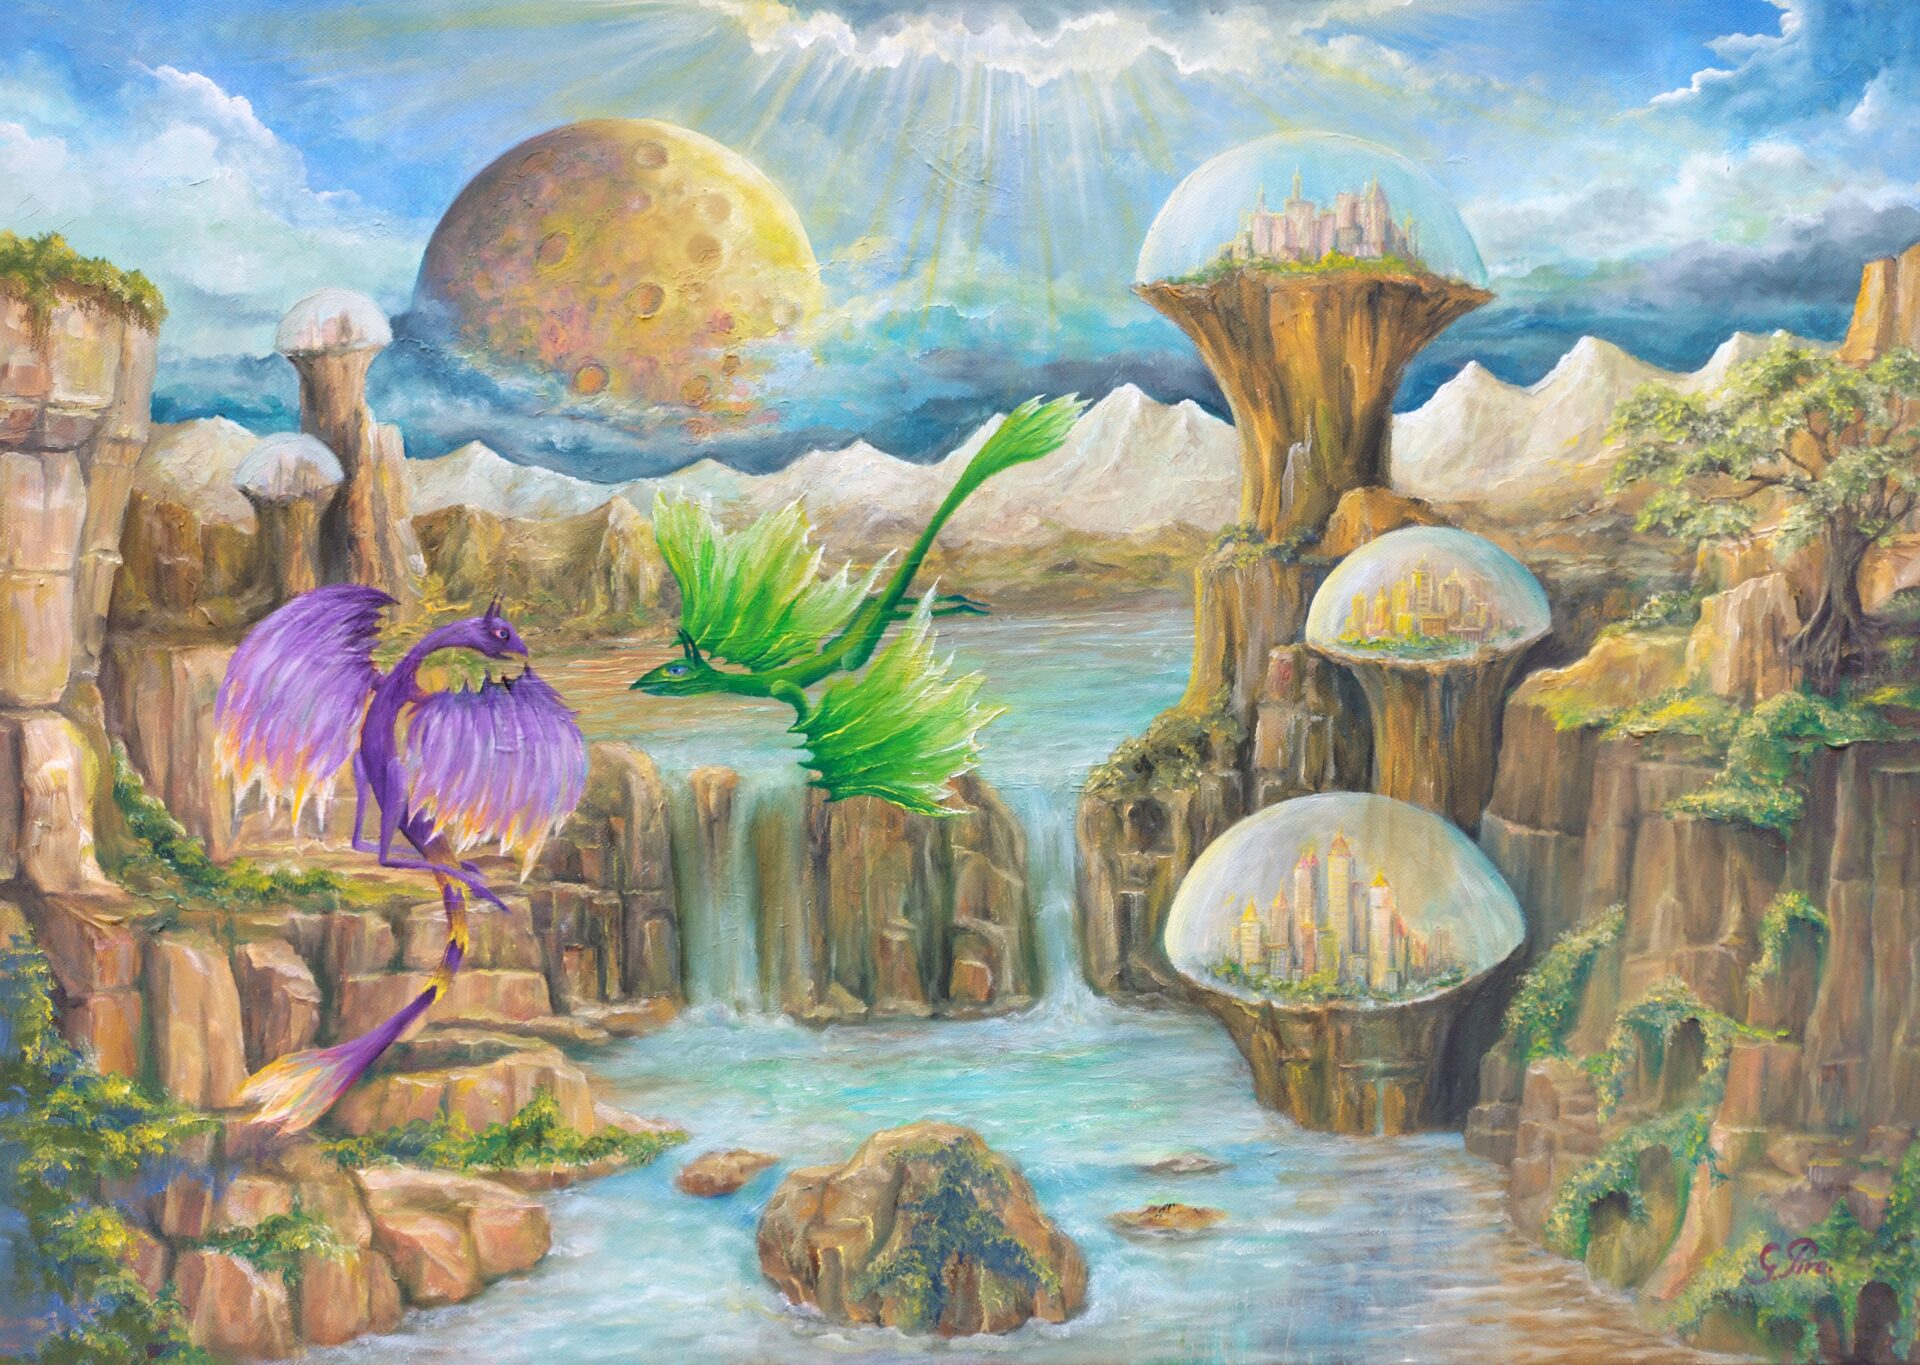 gregory pyra piro, oil painting, surrealistic landscape, landscape scene, another planet, flying dragons, caves, dome, neighborhoods, vegetation, trees, hills, mountains, sky, white clouds, planet Earth, double planet, large moon